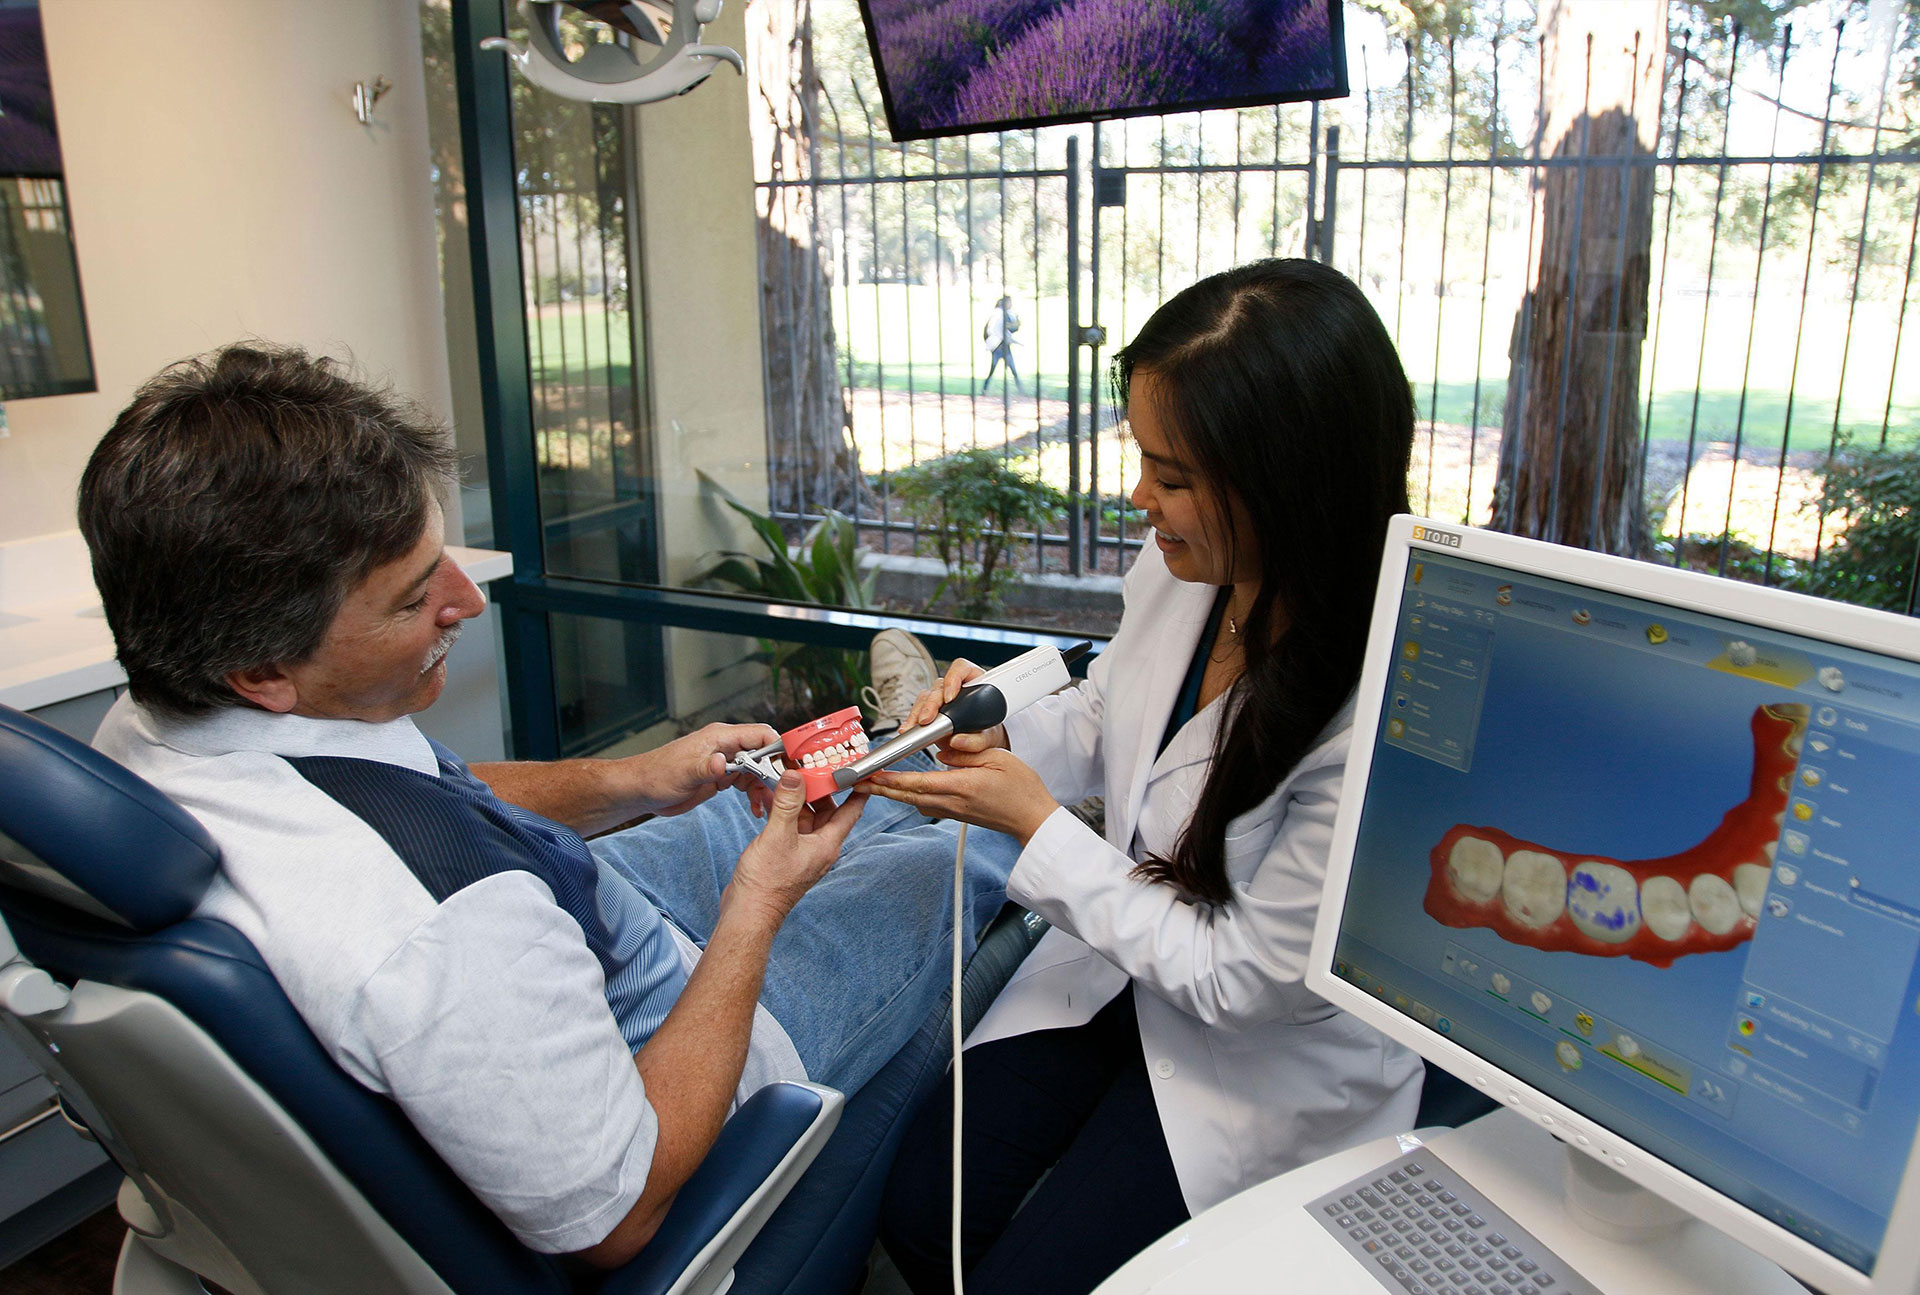 The image shows a dental patient receiving treatment from a dentist, with a monitor displaying the patient s mouth and teeth.